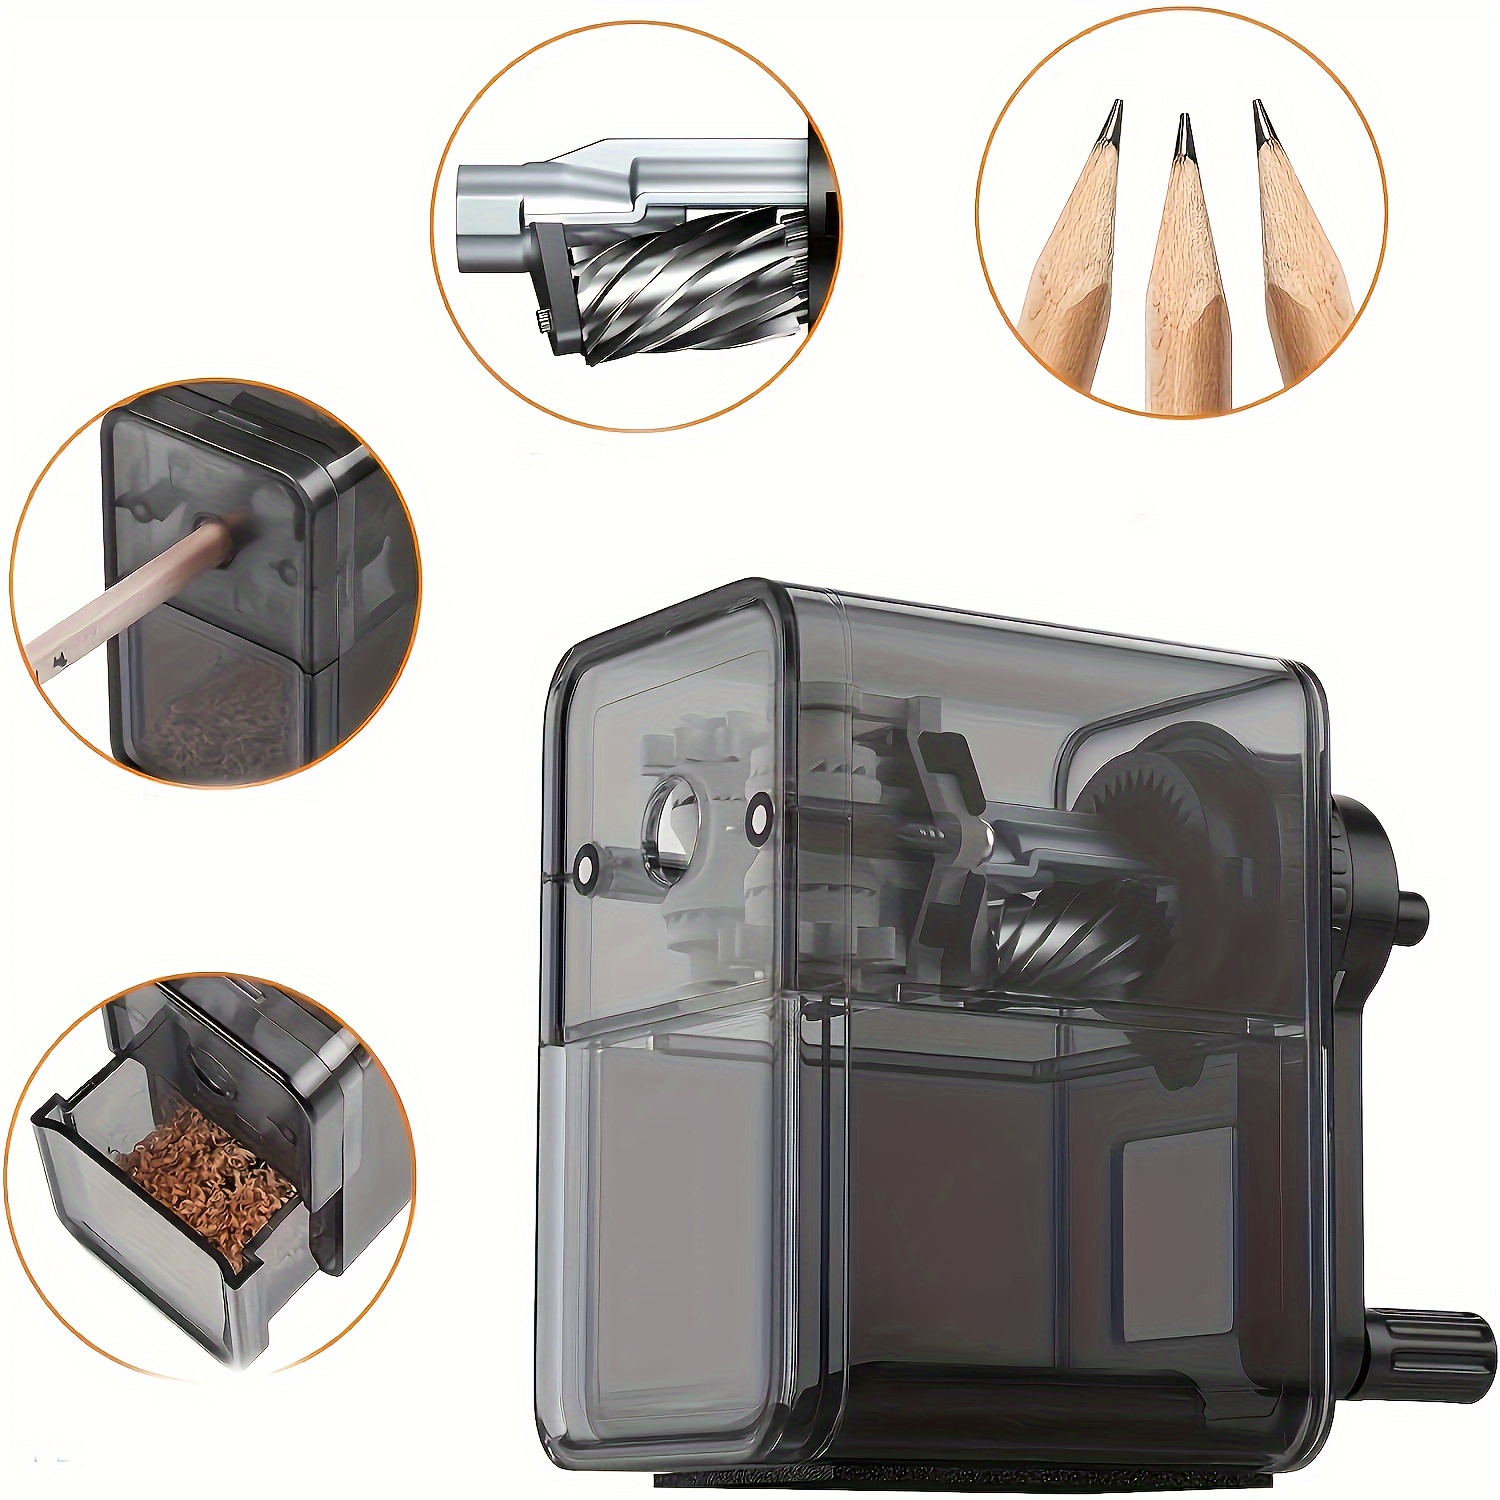 

Automatic Pencil Sharpener For Students And Office, Durable Pvc Material, Hand-cranked Manual Pencil Cutter, Multi-functional Study Supply For Ages 14+, No Battery Needed